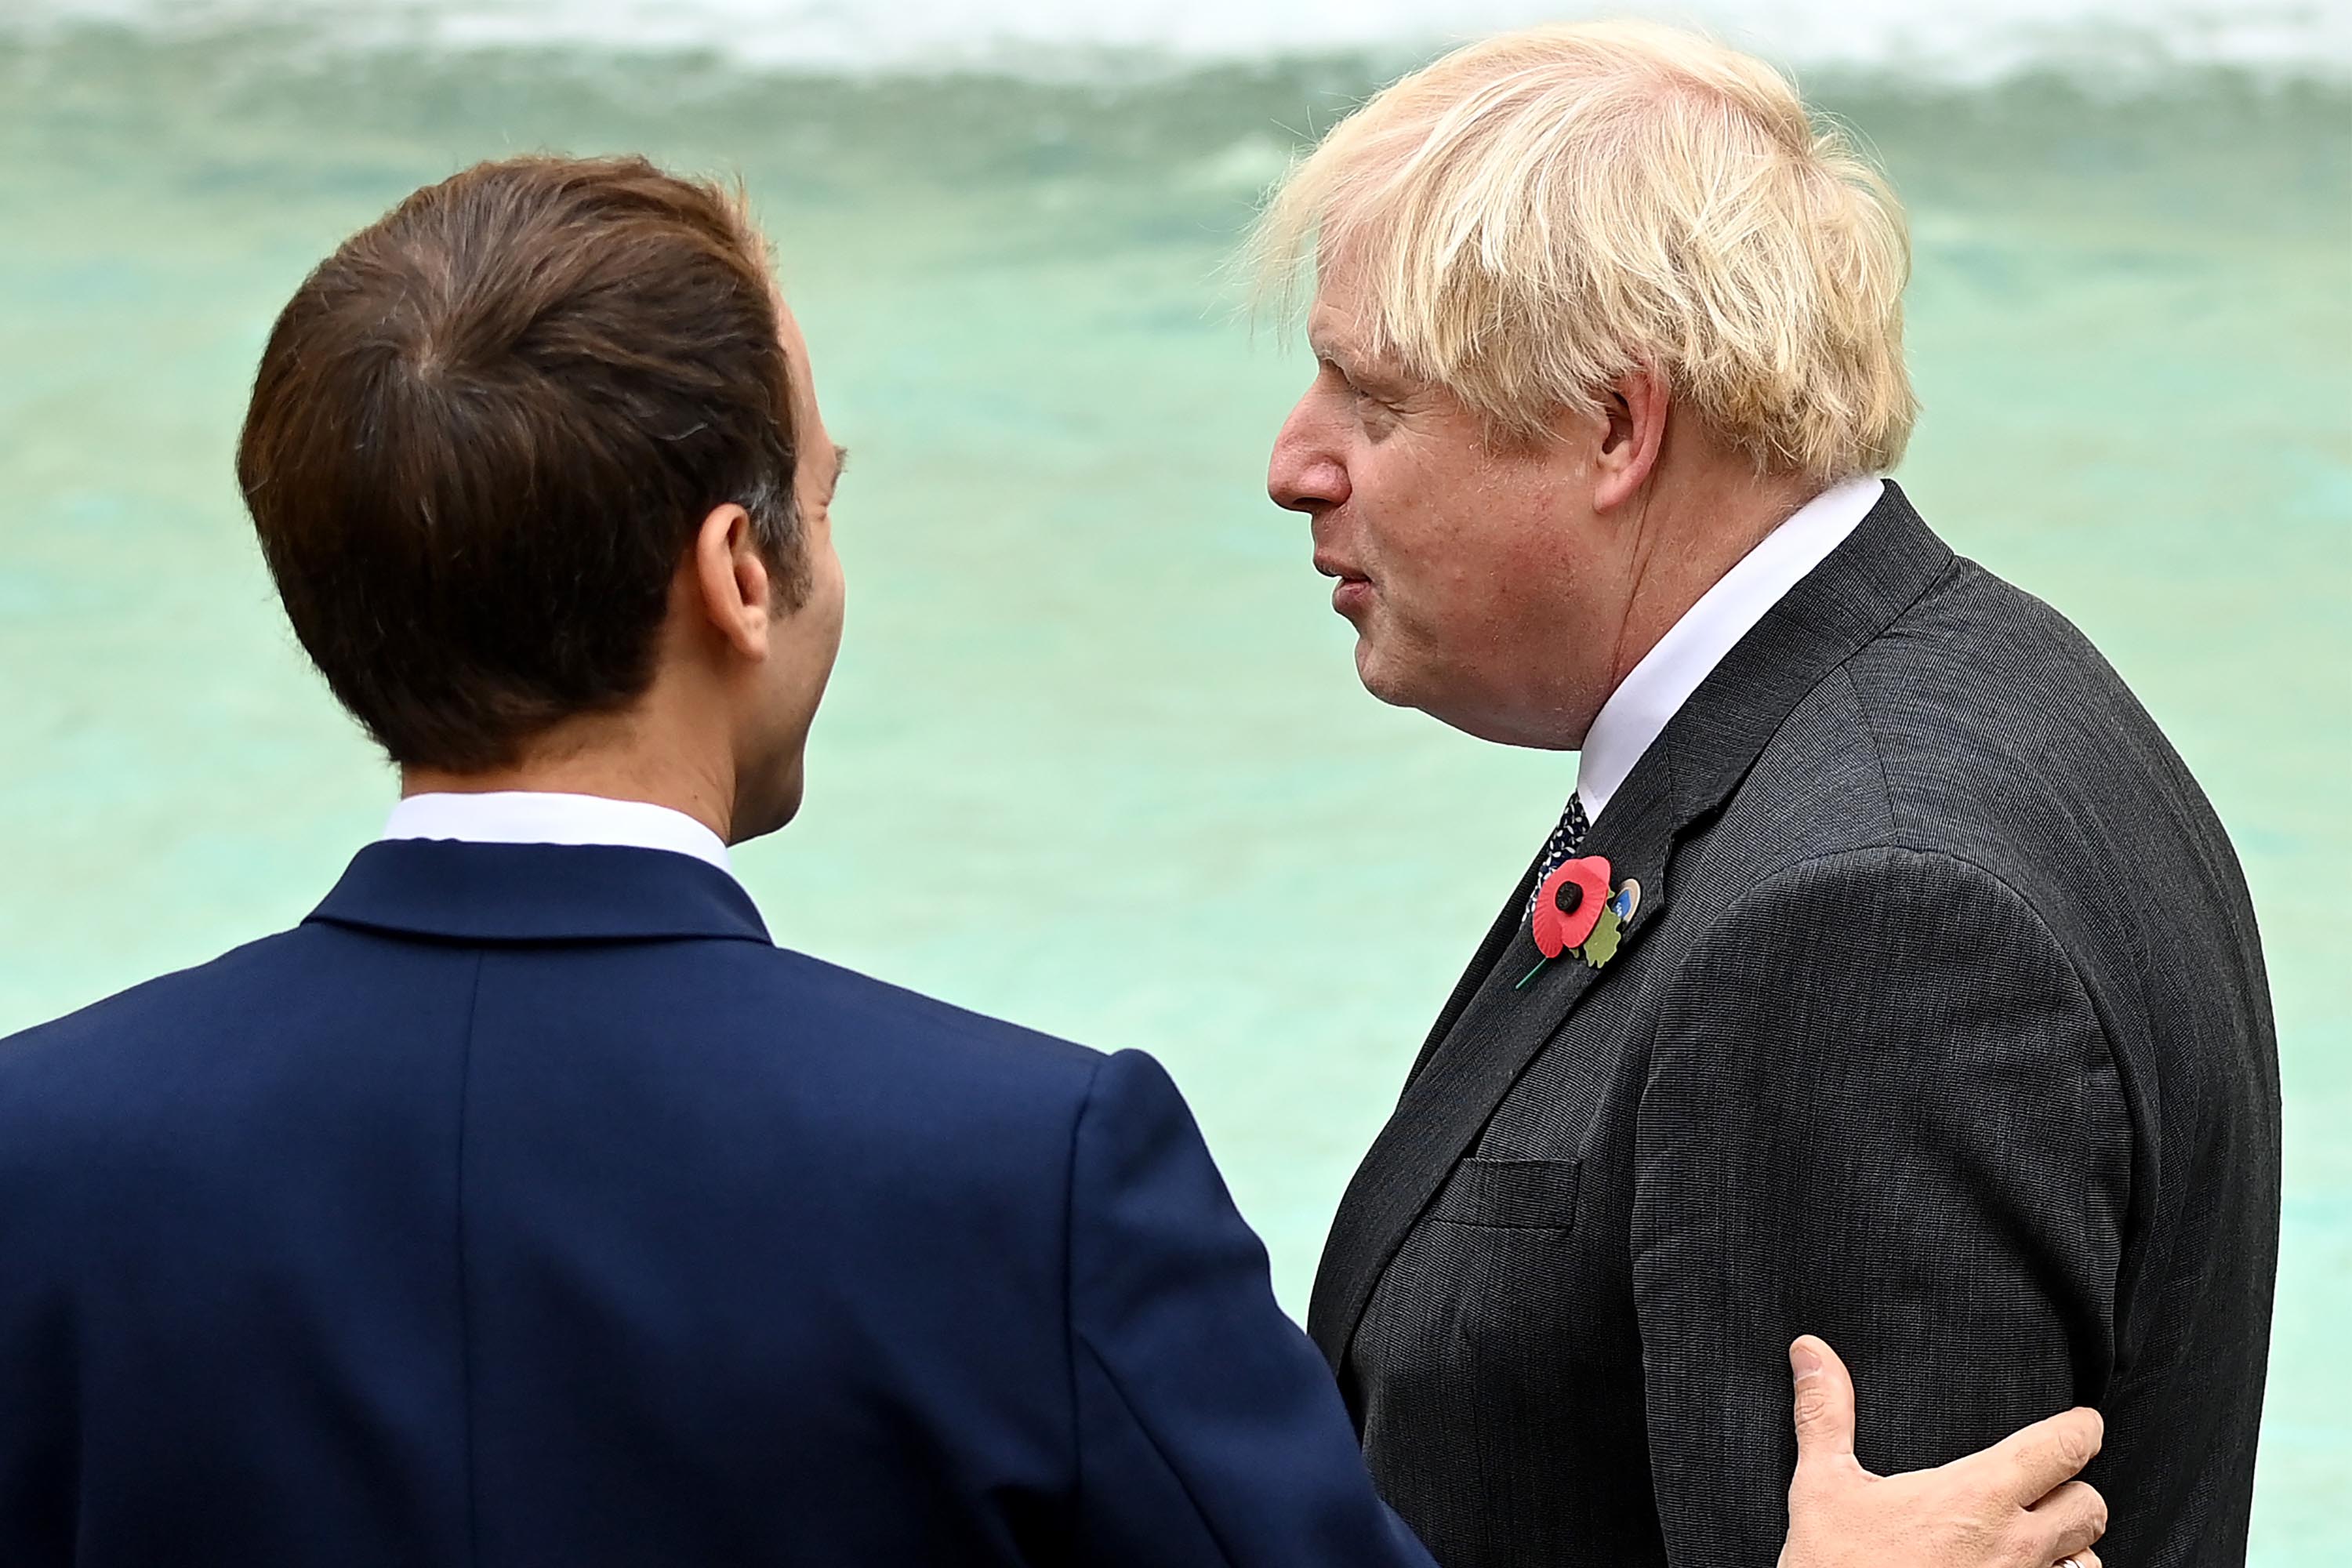 British Prime Minister Boris Johnson speaks to French President Emmanuel Macron during a visit to the Trevi fountain on October 31, 2021 in Rome, Italy.